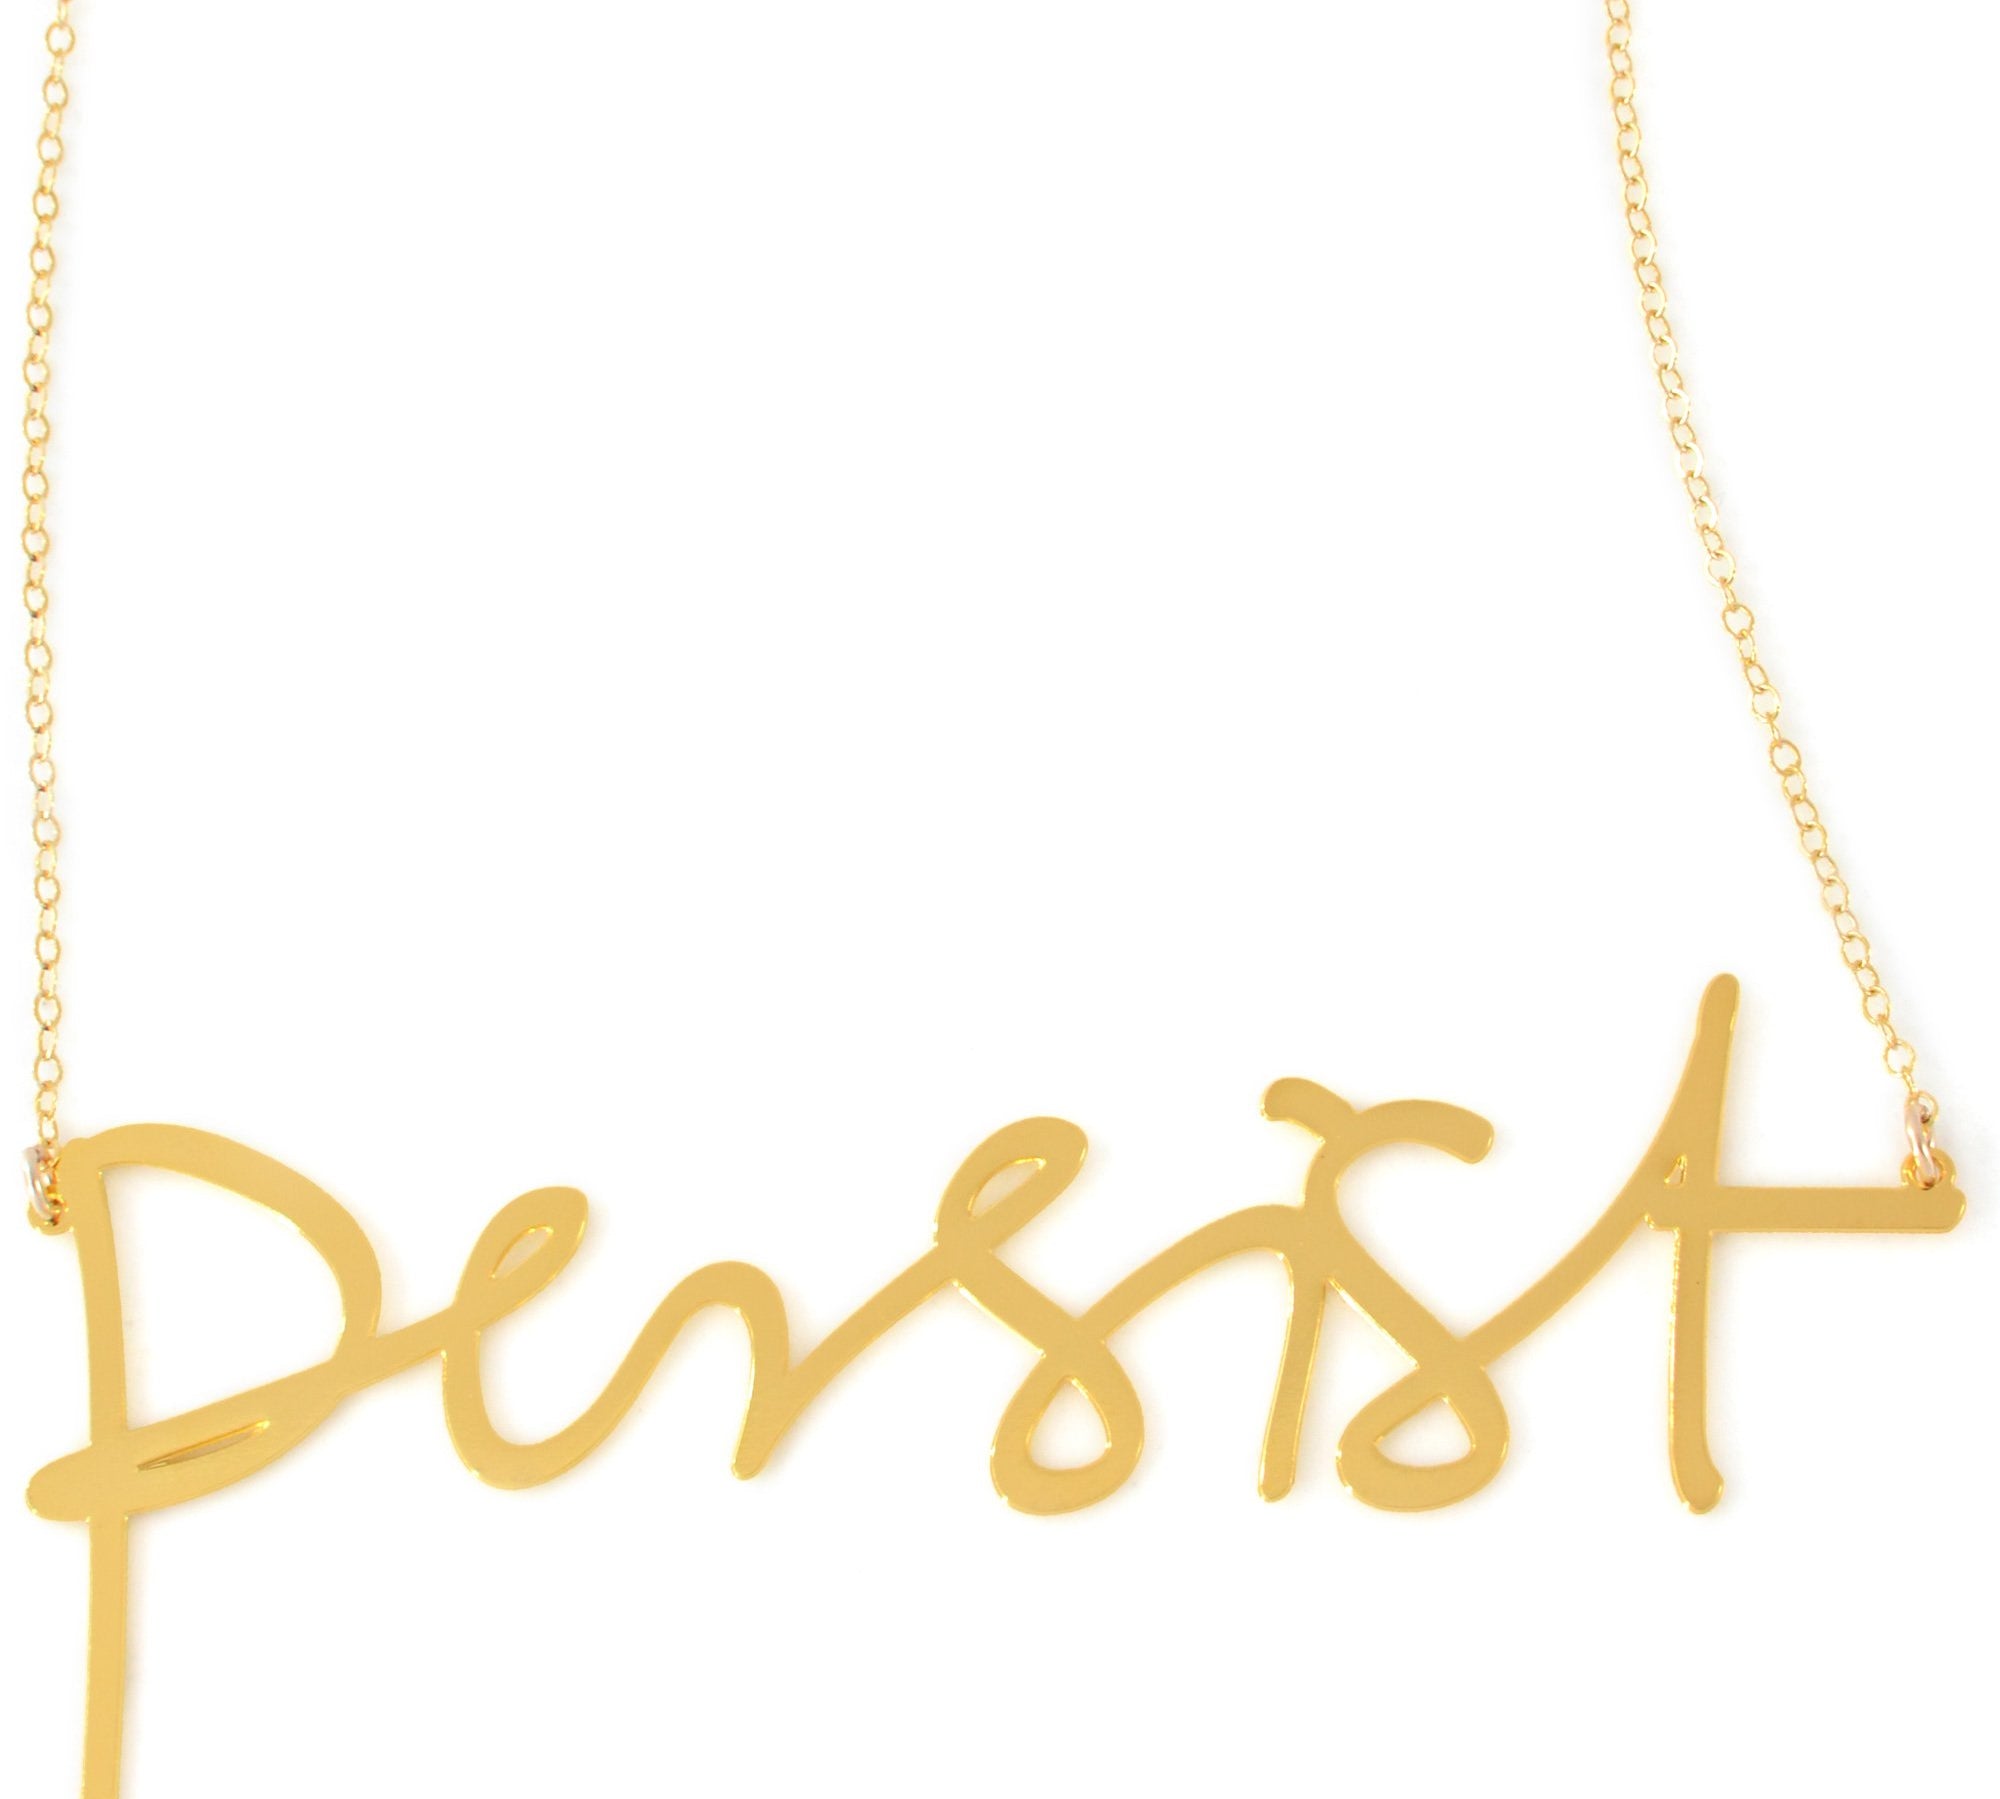 Persist Necklace - High Quality, Affordable, Hand Written, Empowering, Self Love, Mantra Word Necklace - Available in Gold and Silver - Small and Large Sizes - Made in USA - Brevity Jewelry